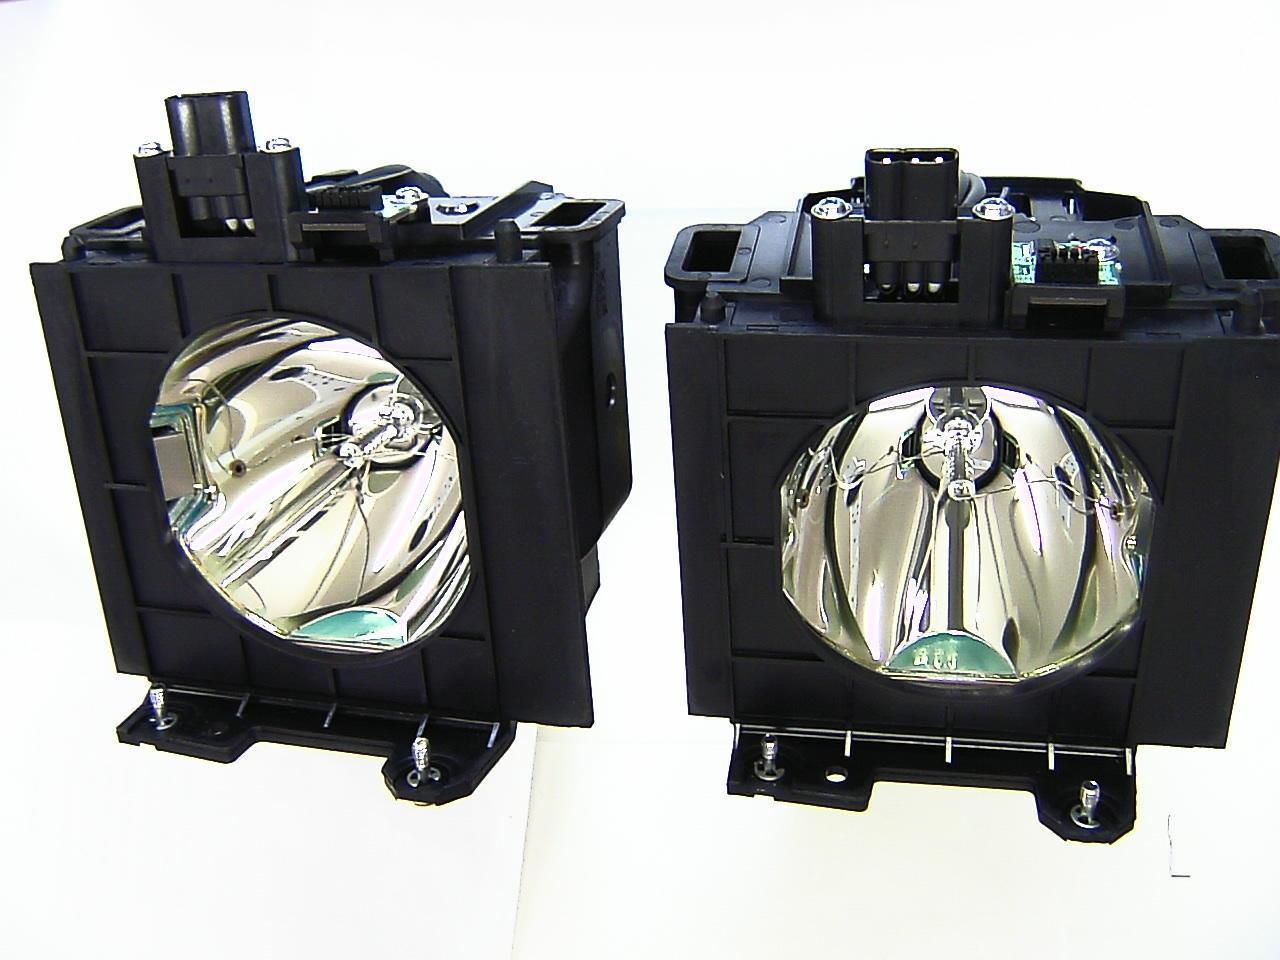 ET-LAD57W Panasonic Twin-Pack Projector Lamp Replacement (contains two lamps). Projector Lamp Assembly with High Quality OEM Co